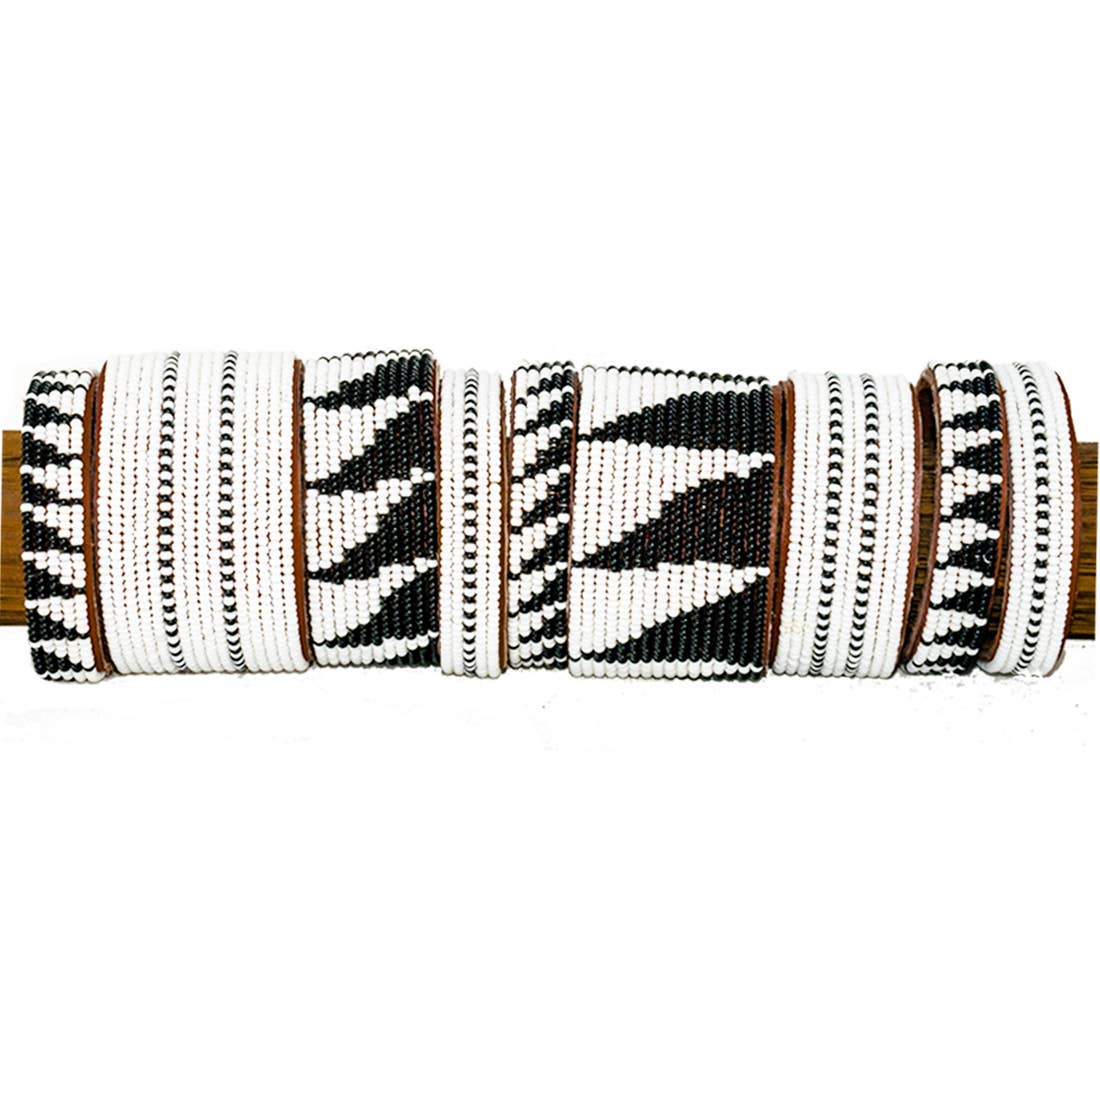 Black Swahili Bracelet Jewelry available at Southern Sunday